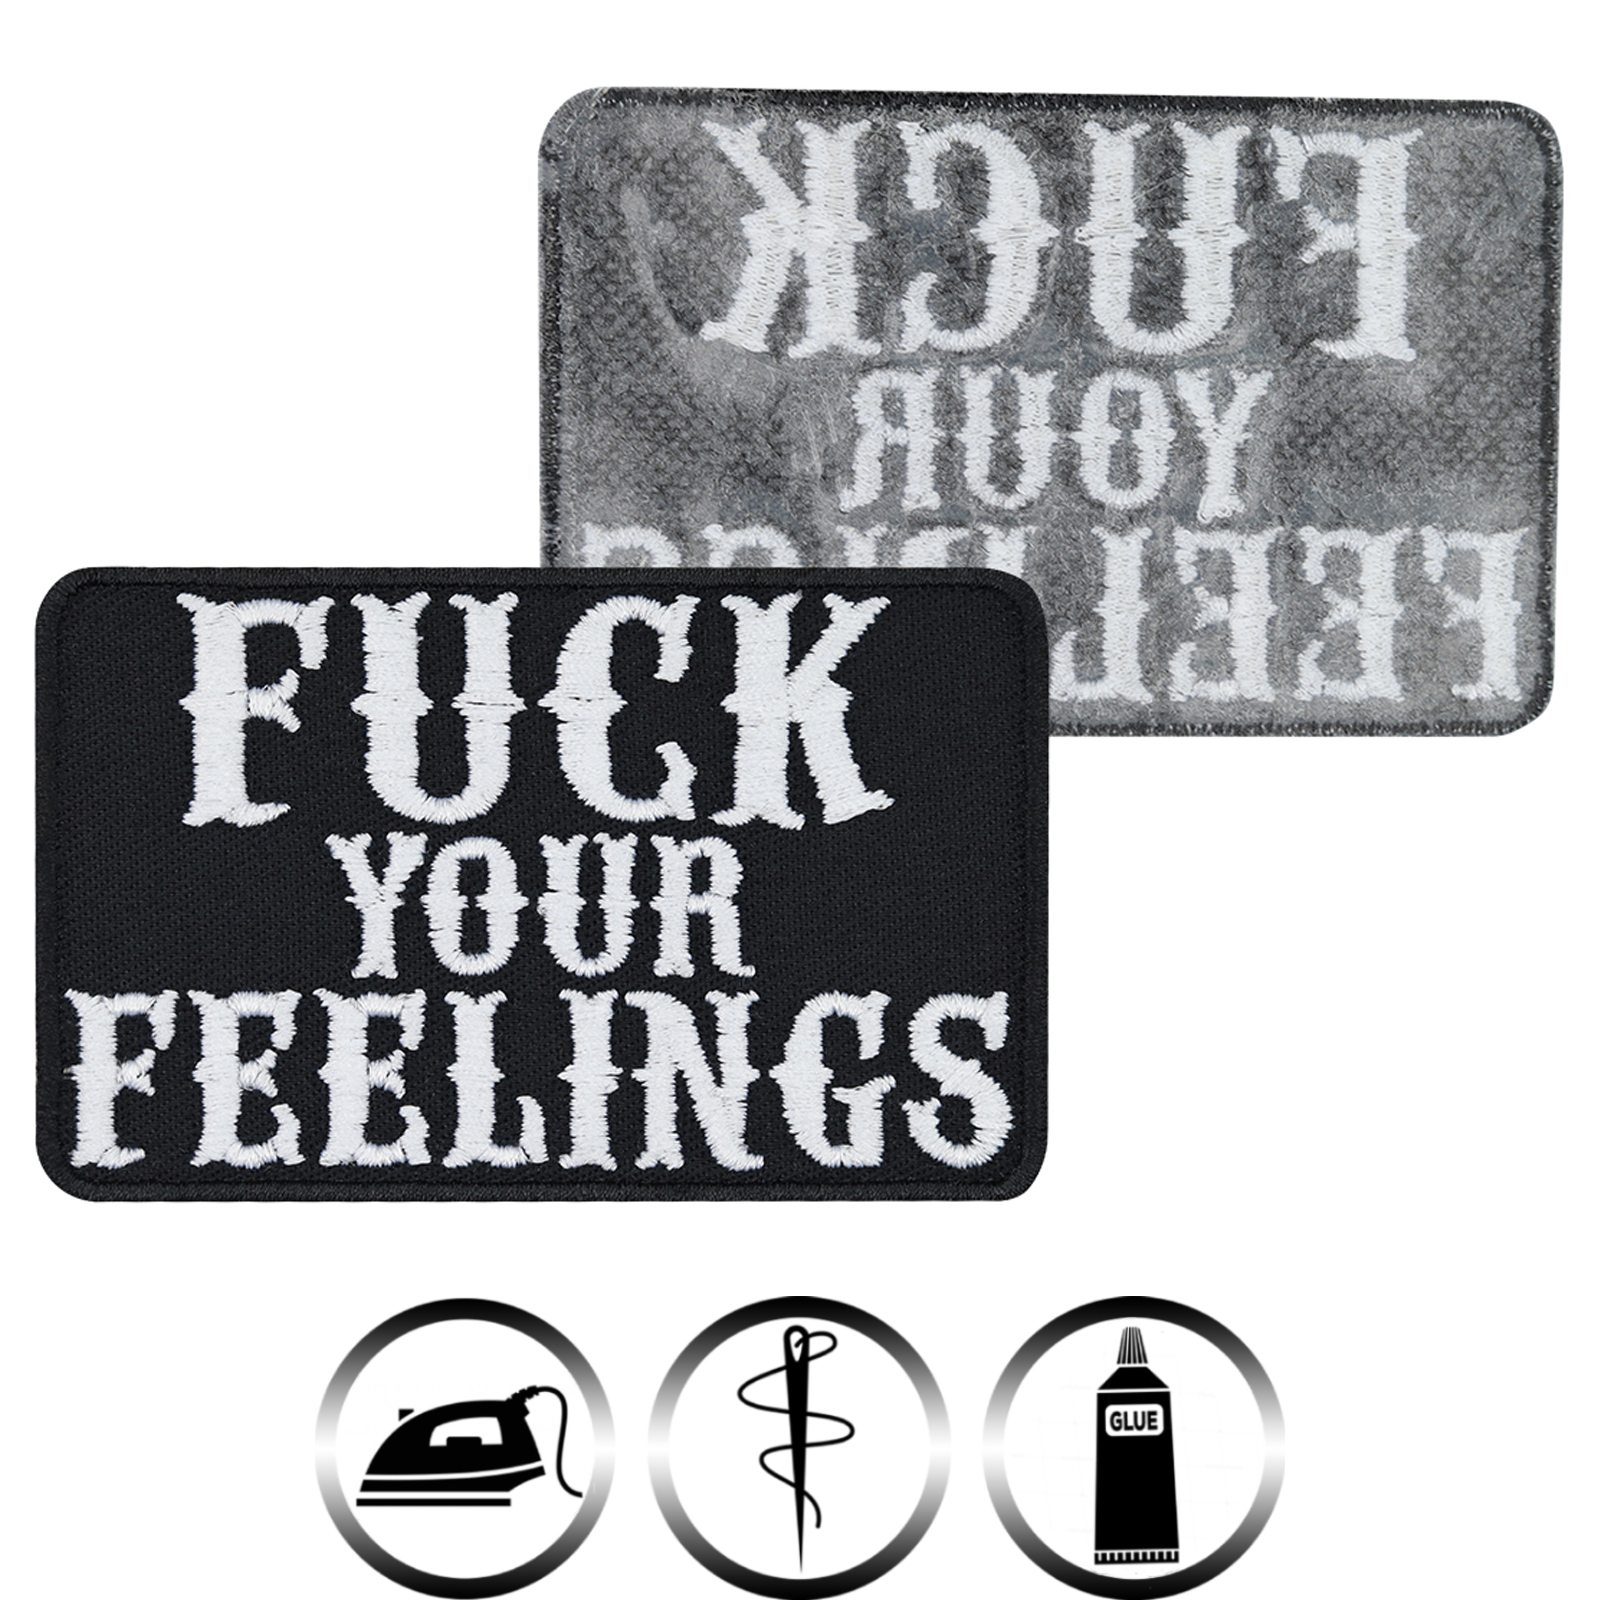 Fuck your feelings - Patch